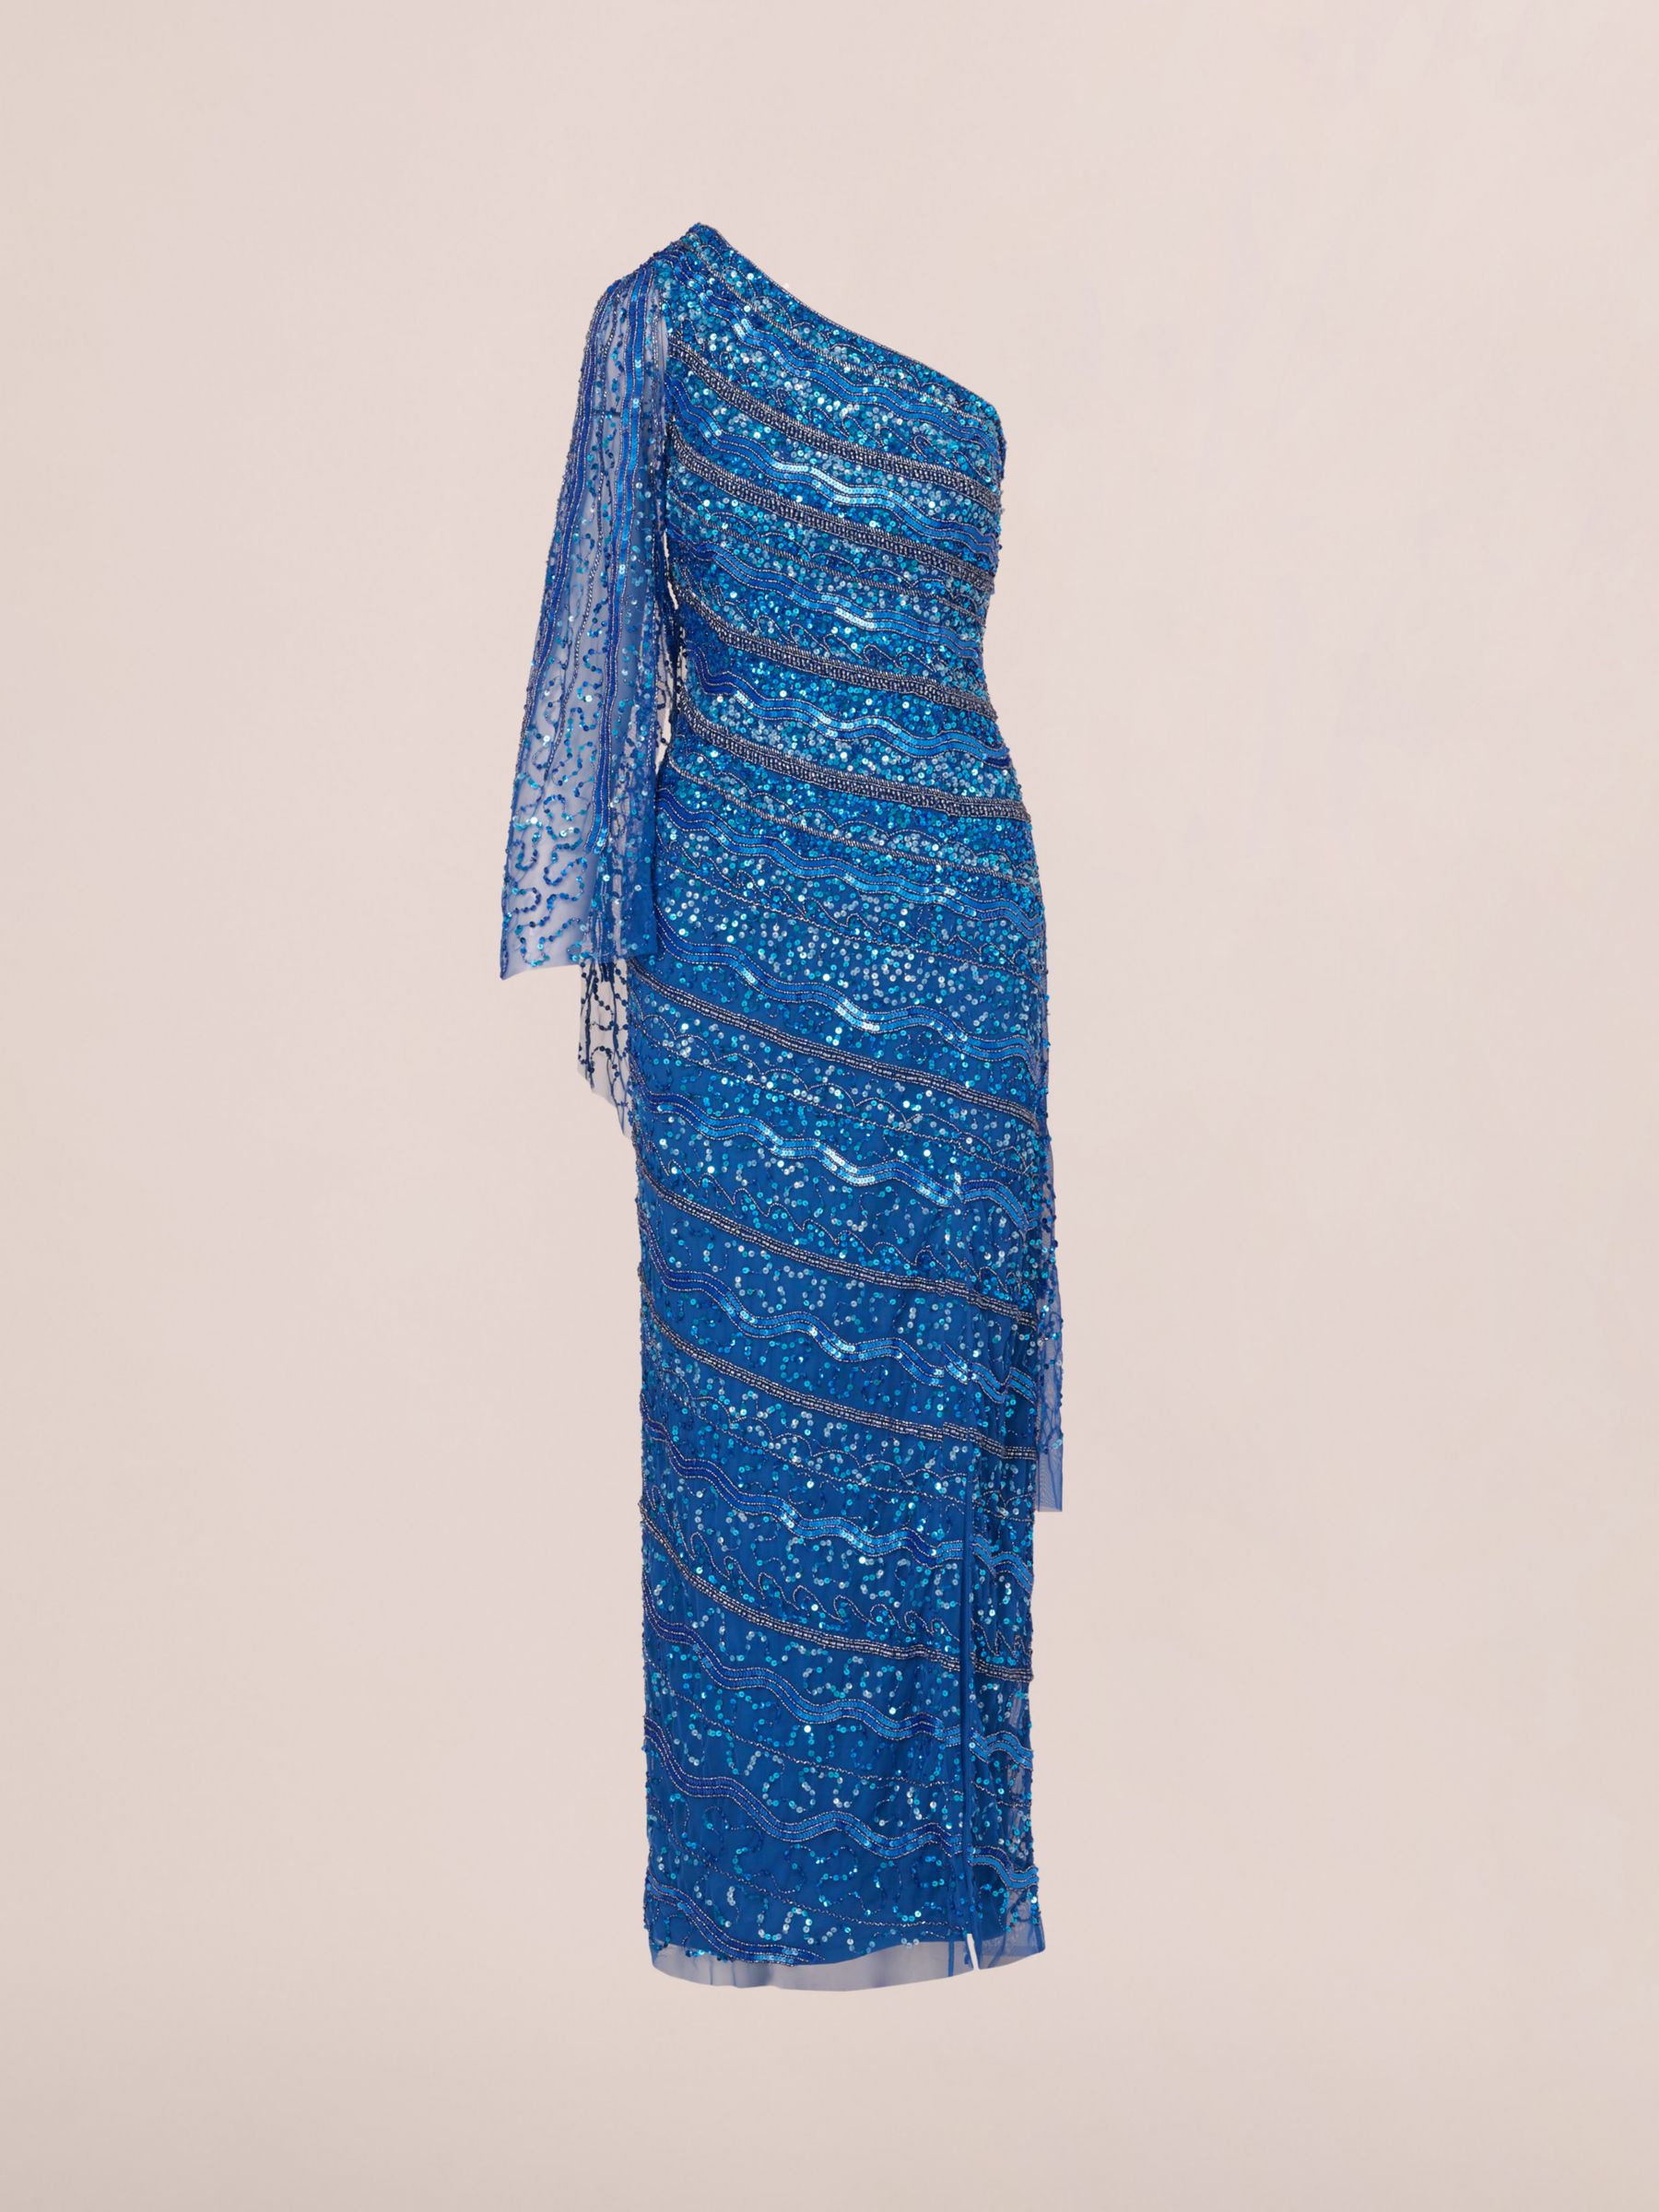 Buy Adrianna Papell One Shoulder Beaded Maxi Dress, Blue Horizon Online at johnlewis.com